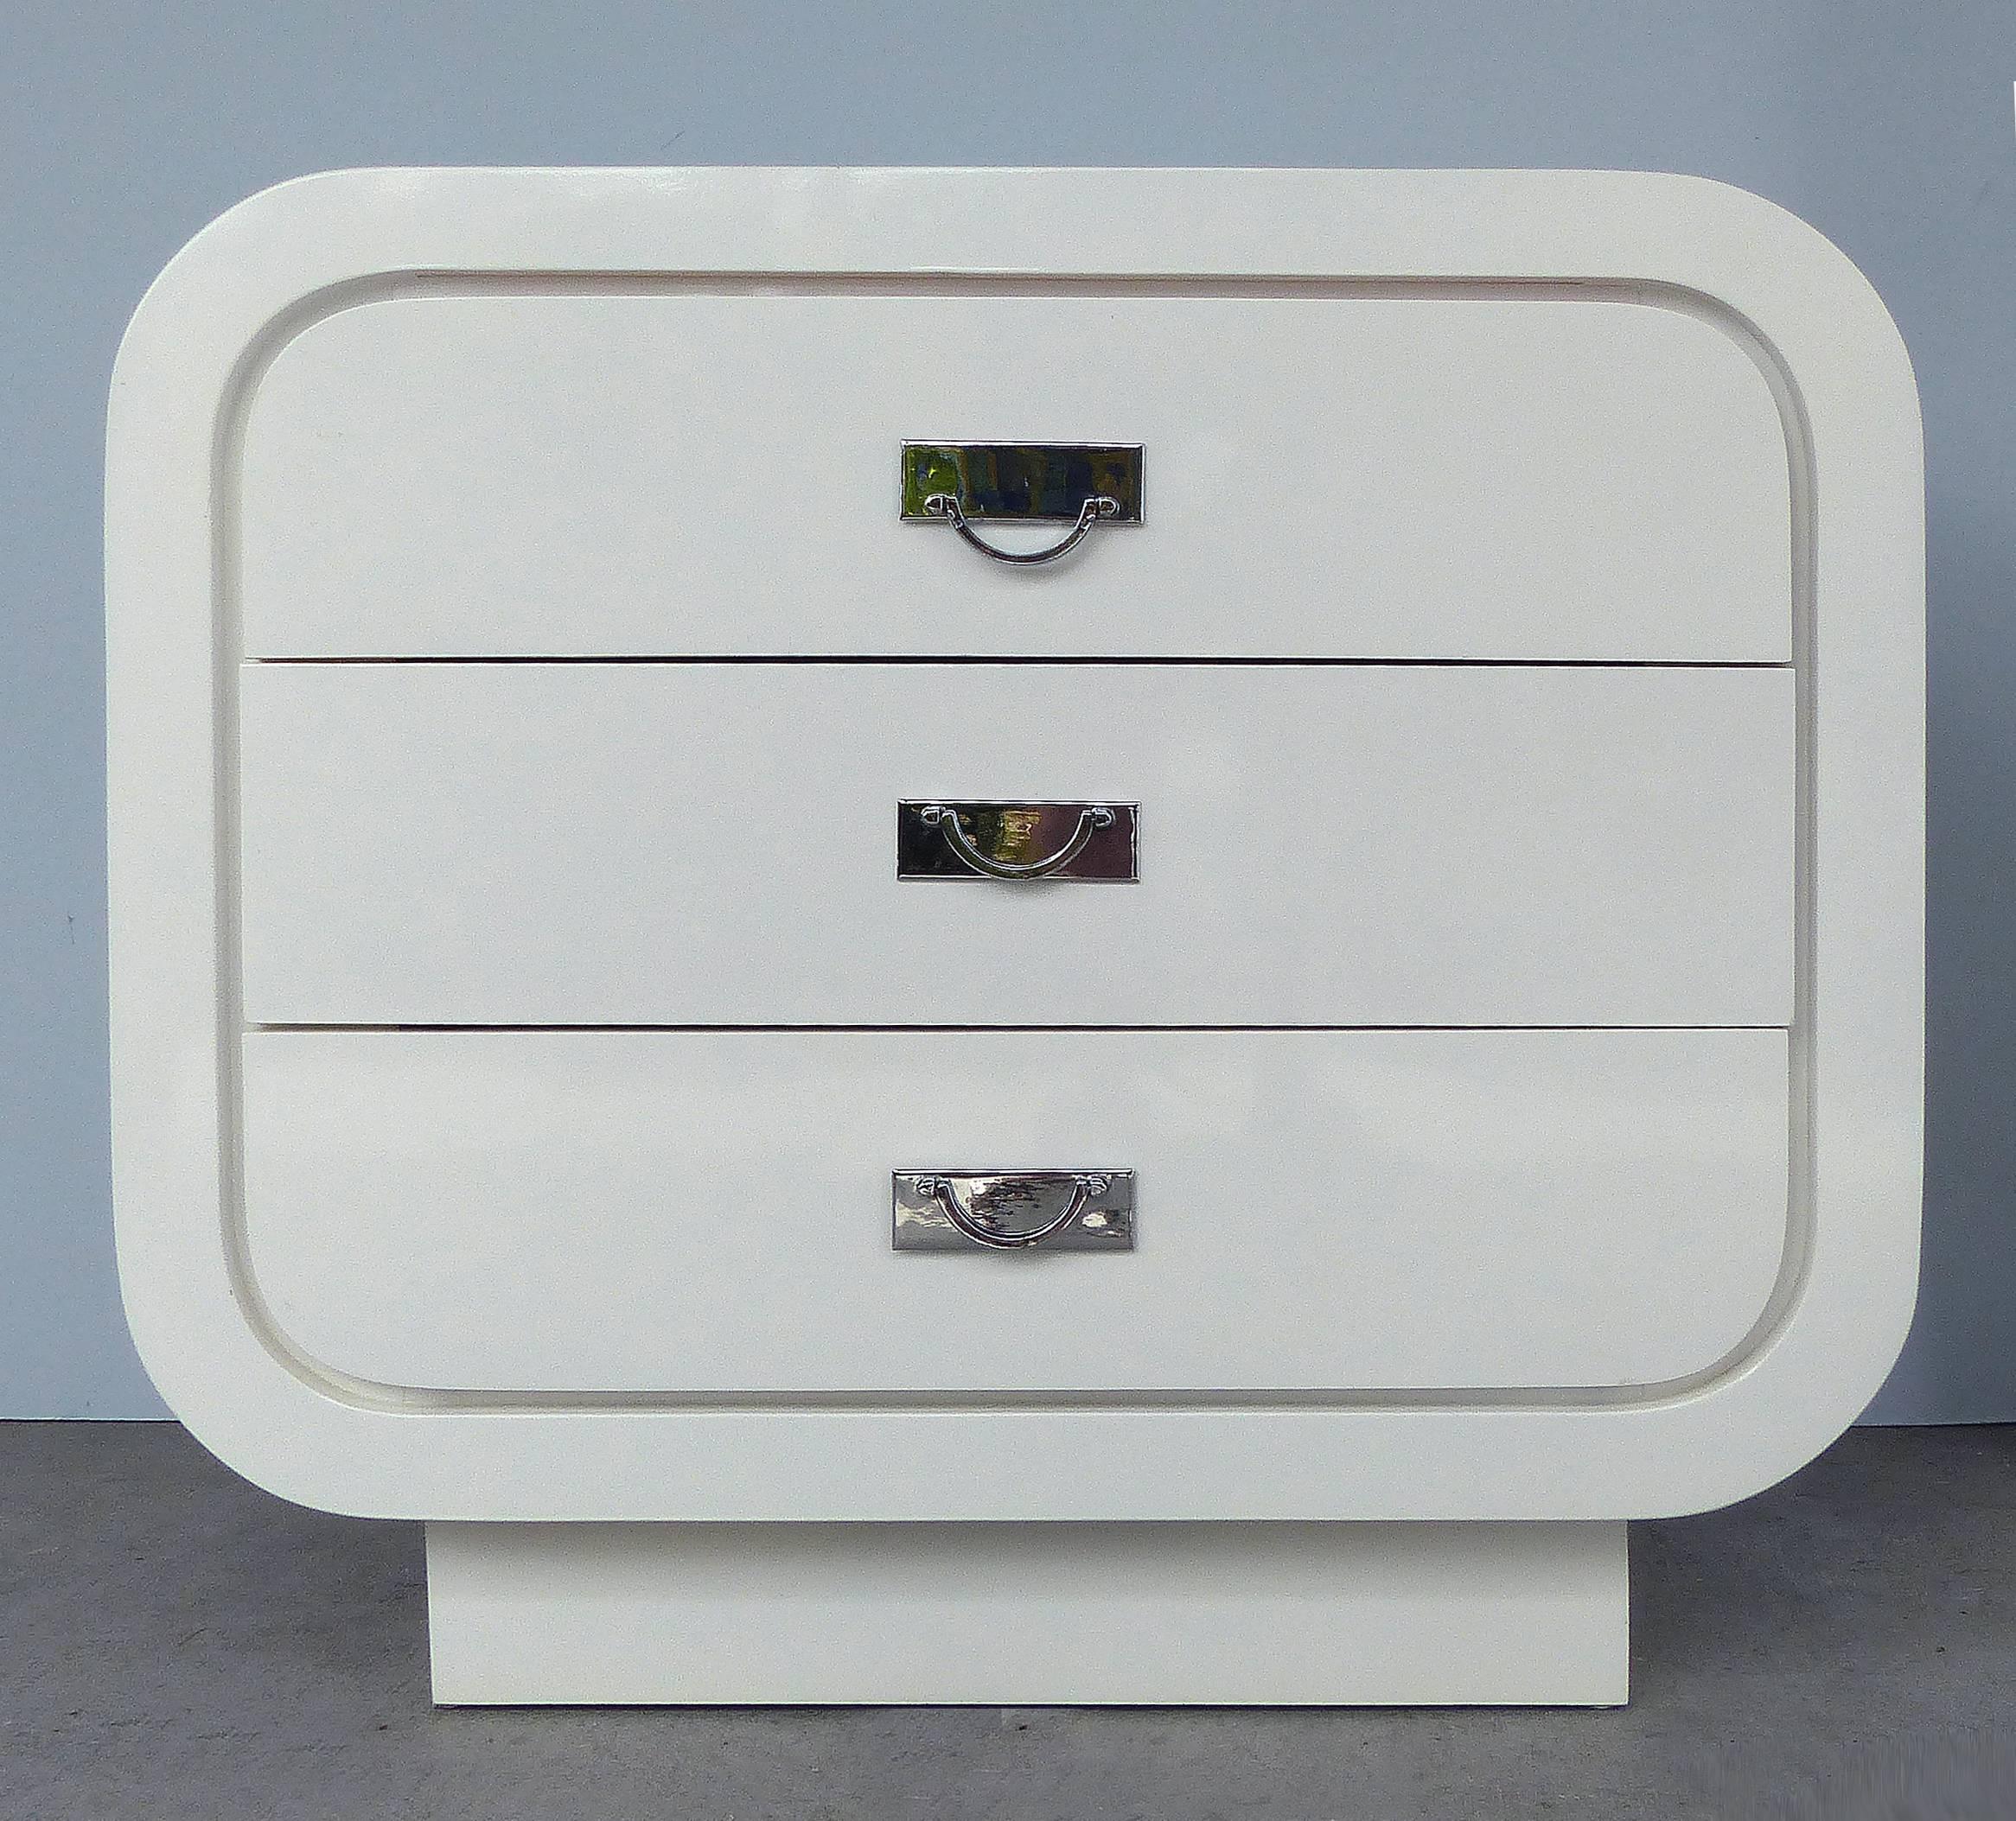 Offered for sale is a pair of Mid-Century Modern white lacquered chests with rounded edges, three drawers and chrome-plated hardware. The chests are the perfect size to use as night stands.